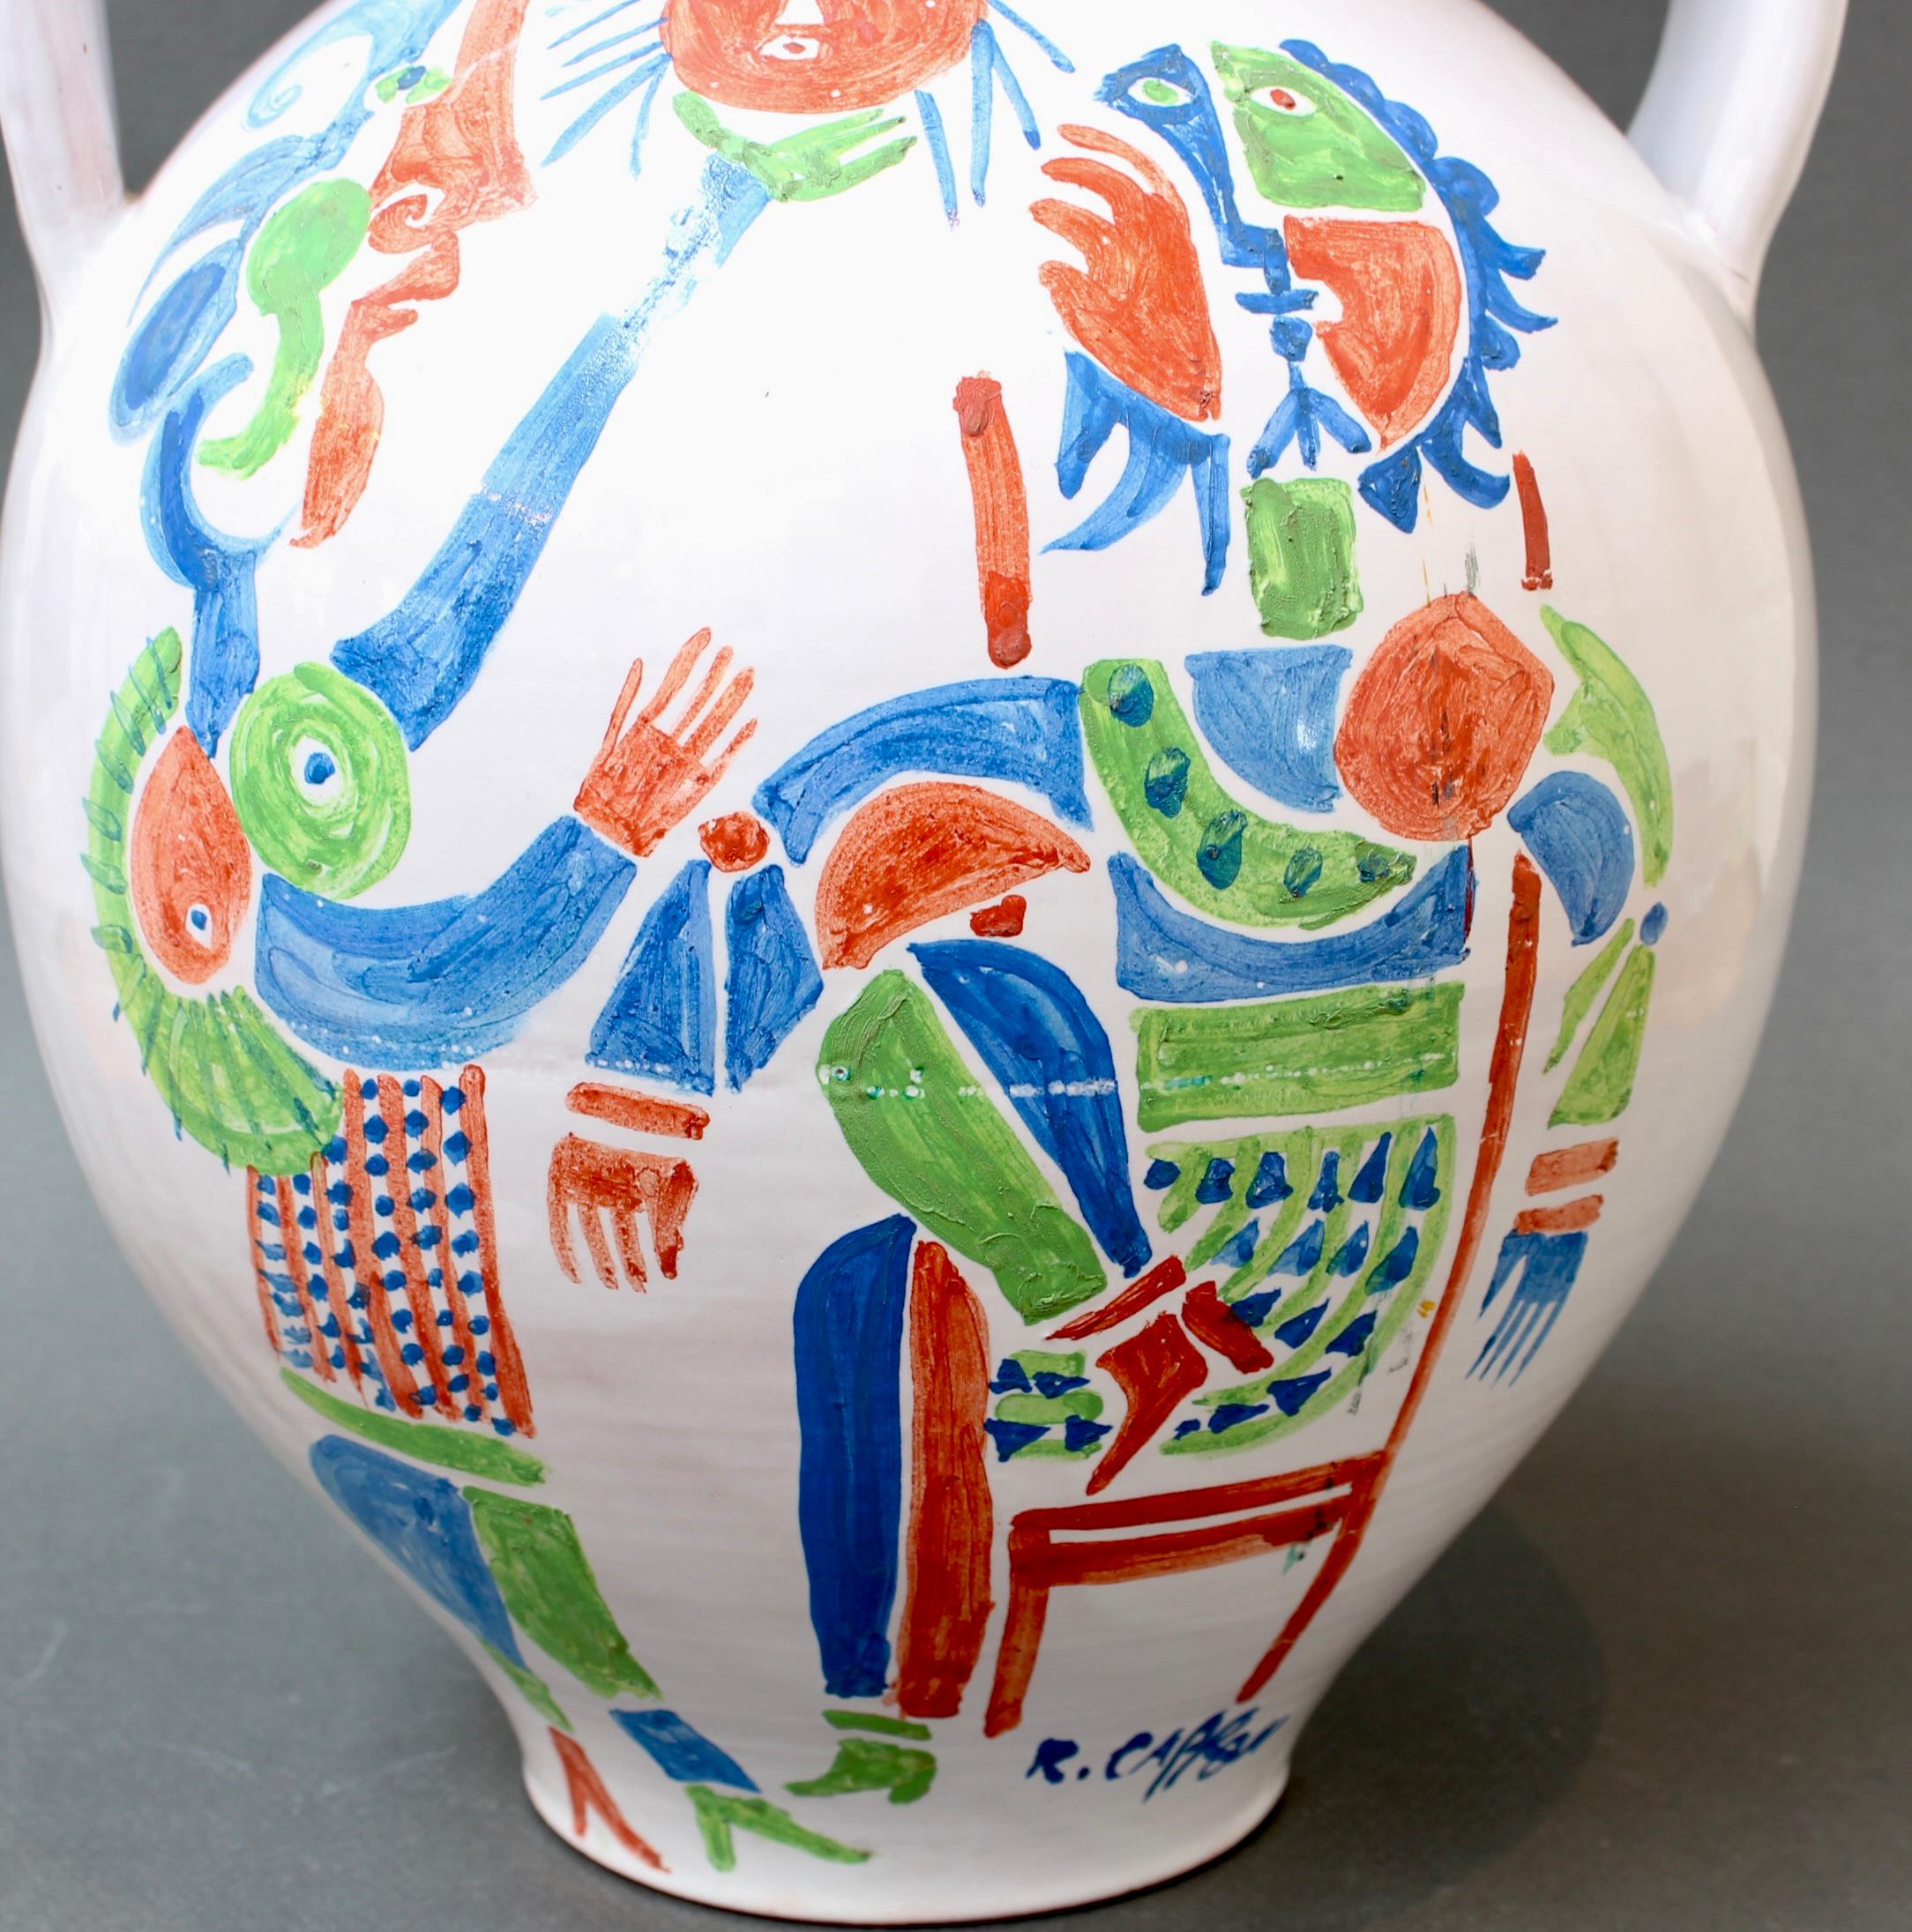 Vintage French Hand-Painted Ceramic Vase by Roger Capron (circa 1960s) For Sale 4